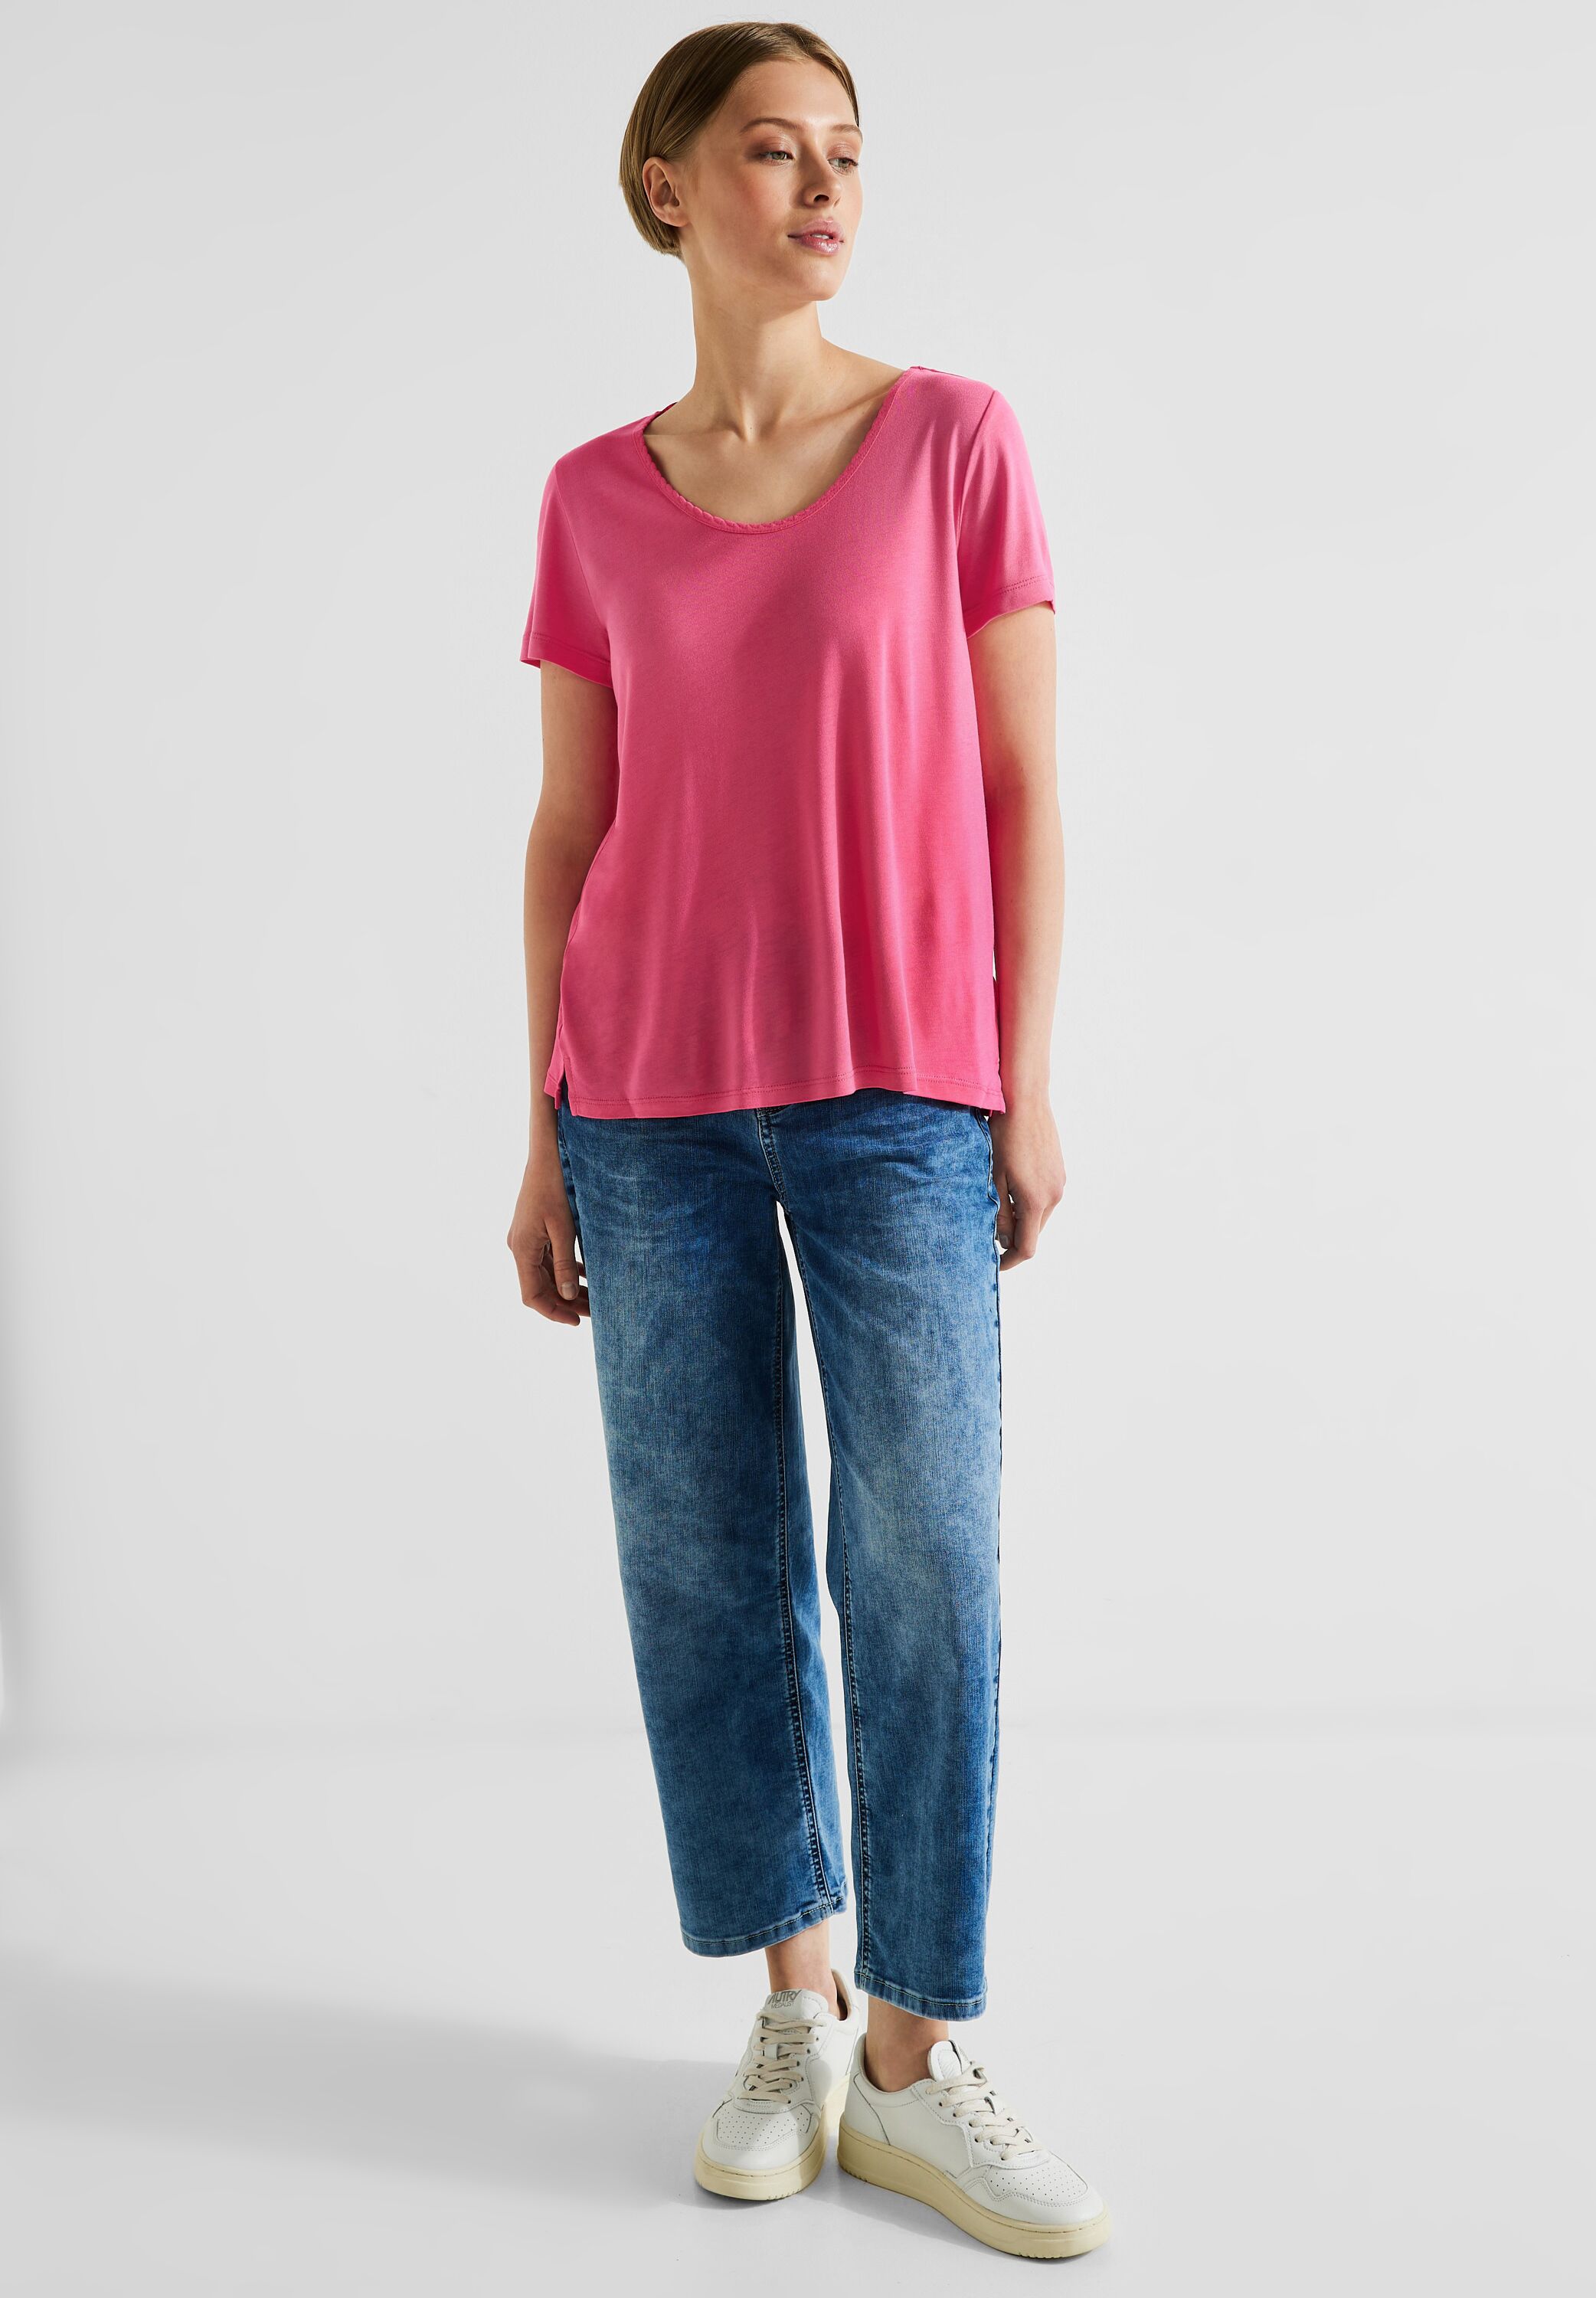 CONCEPT T-Shirt in Berry Street Mode reduziert im - A320124-14647 Rose SALE One